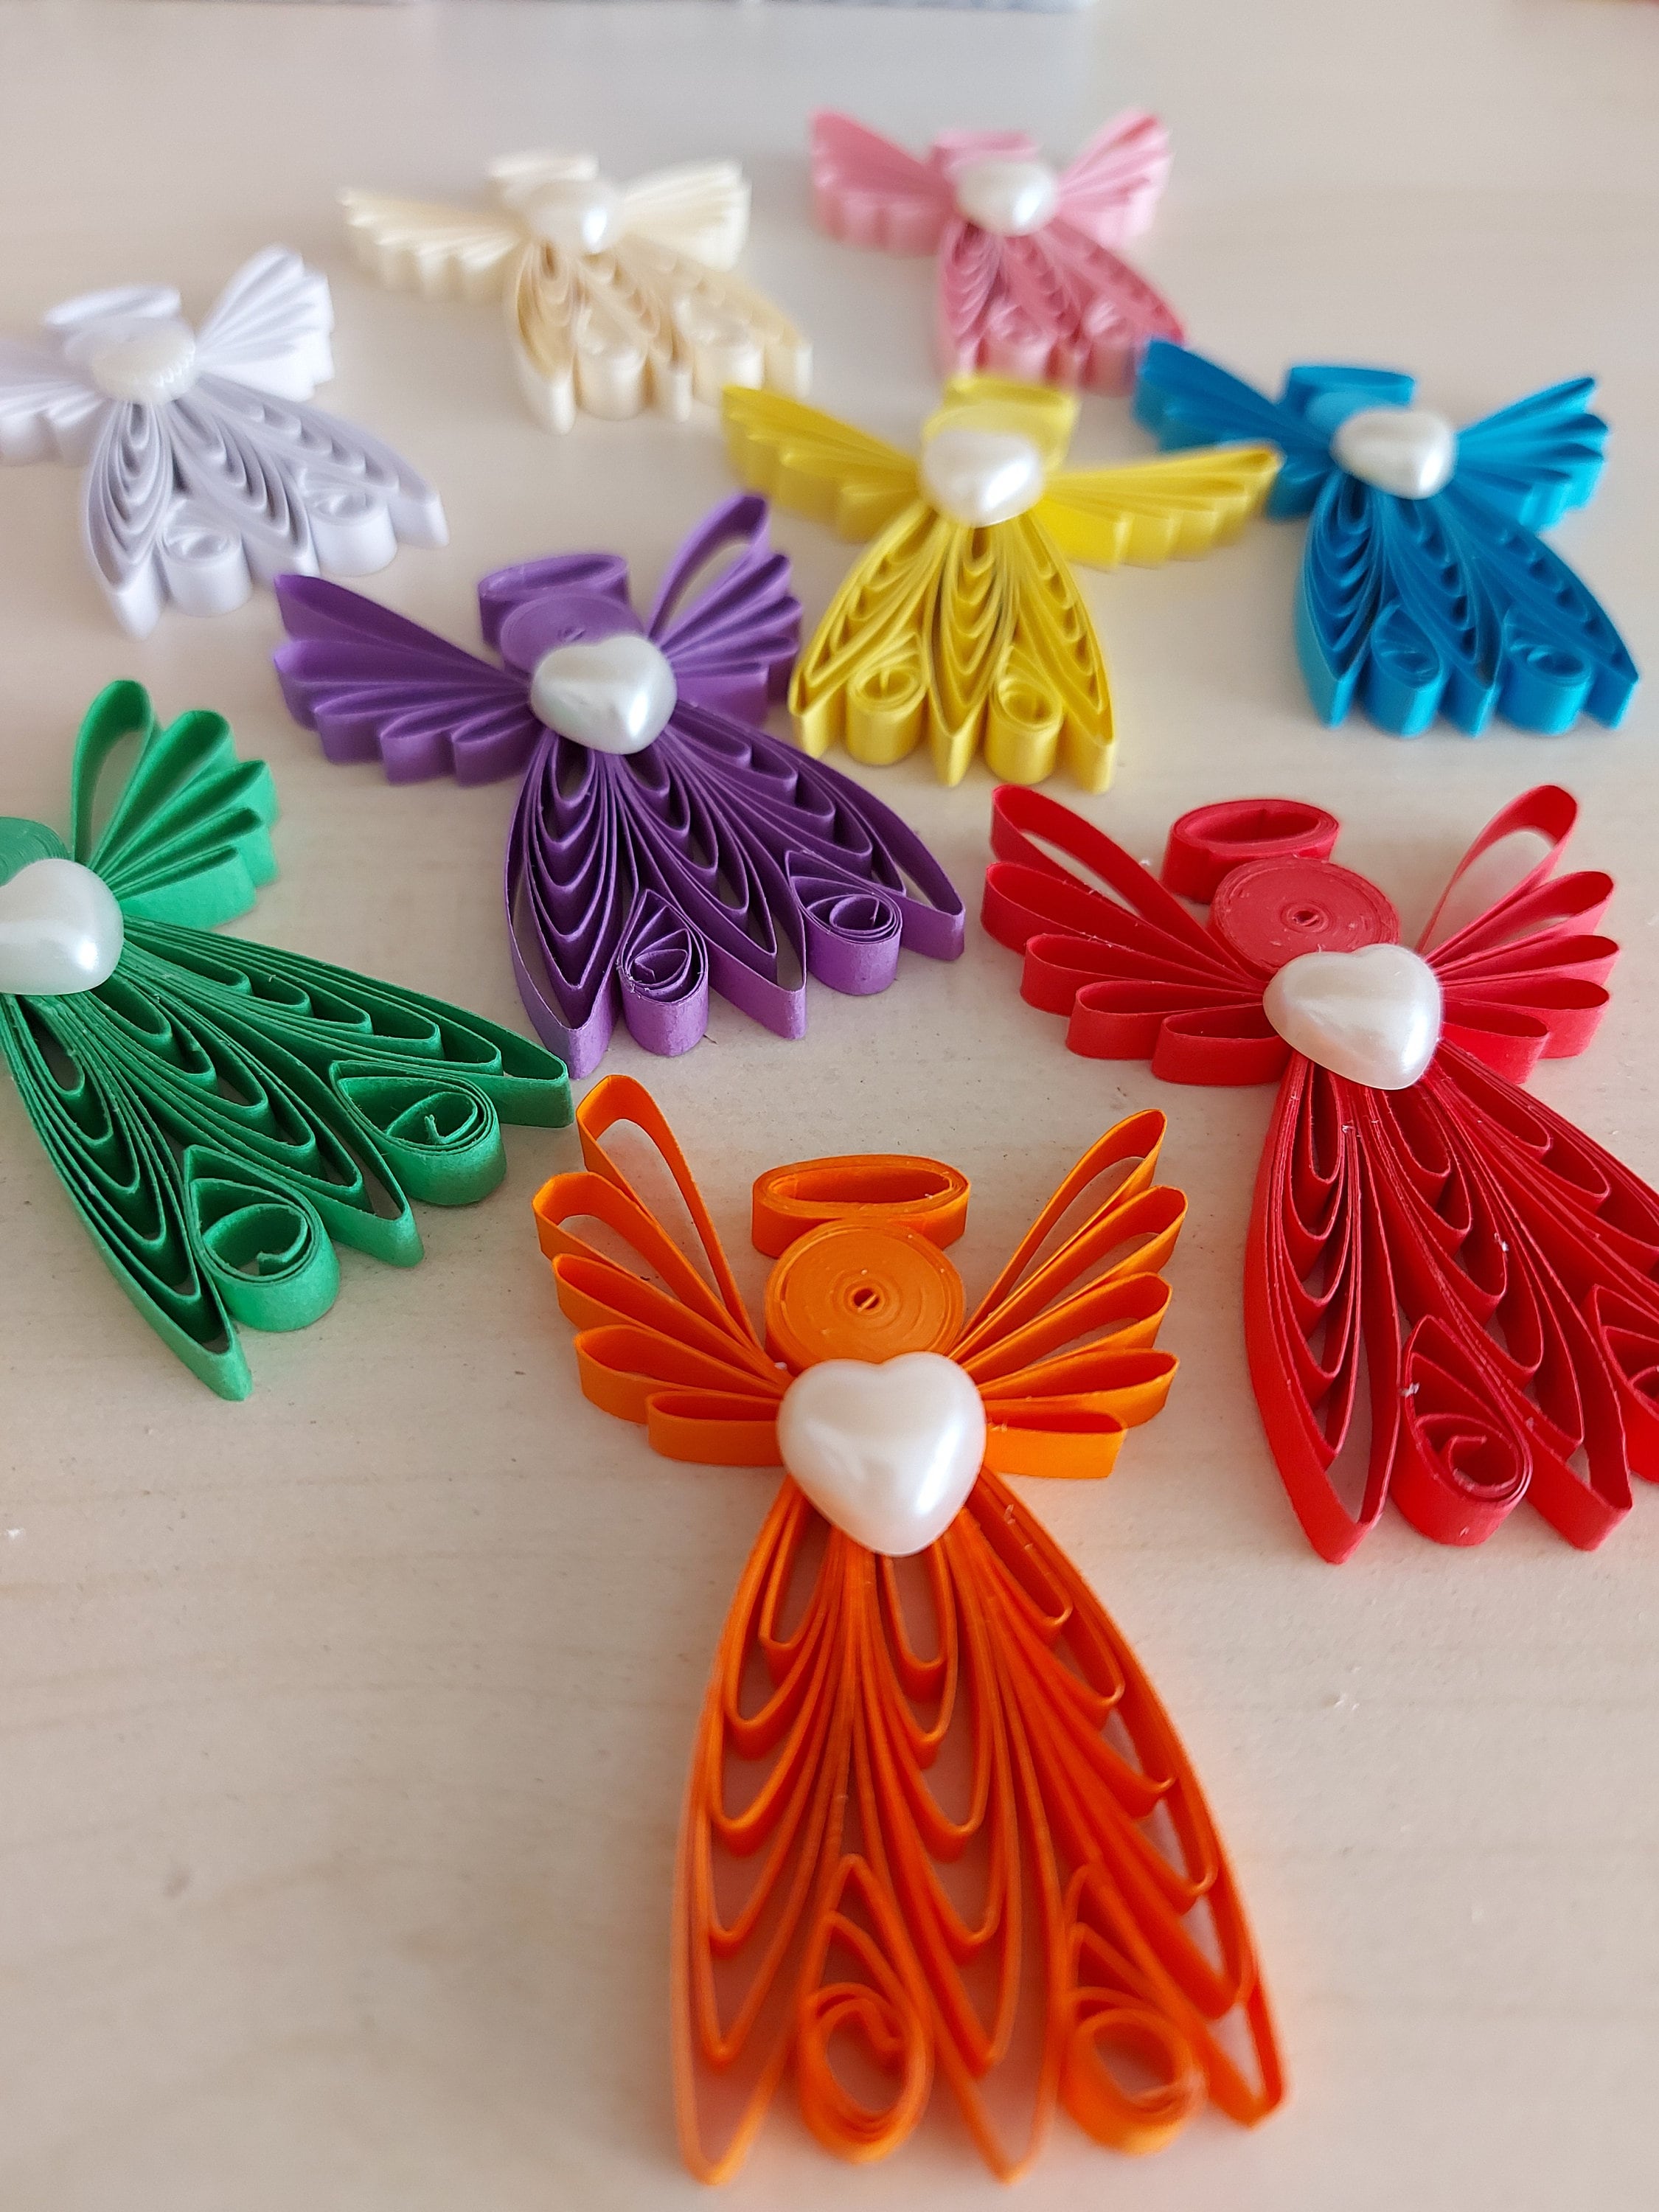 Quilling with Agnes of Aggies Quillings